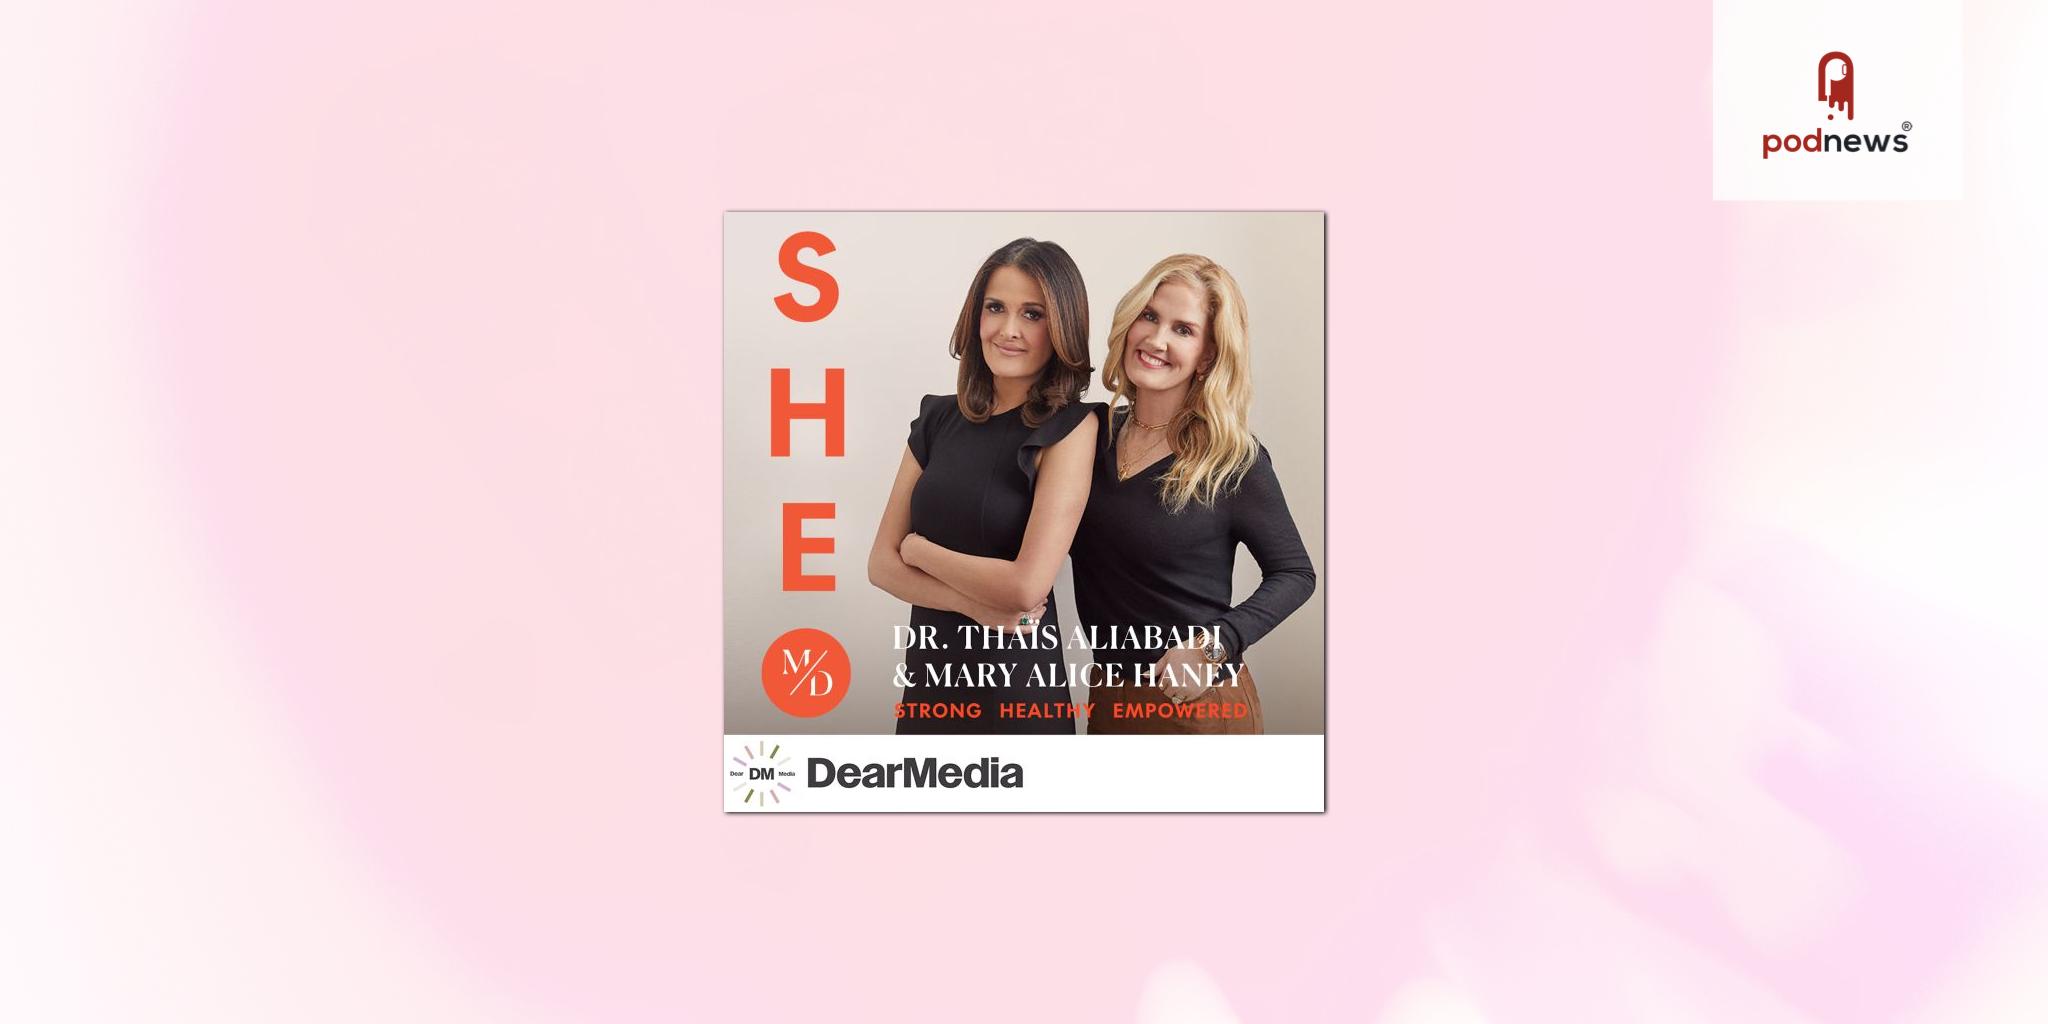 Introducing SHE MD: a women’s health advocacy podcast